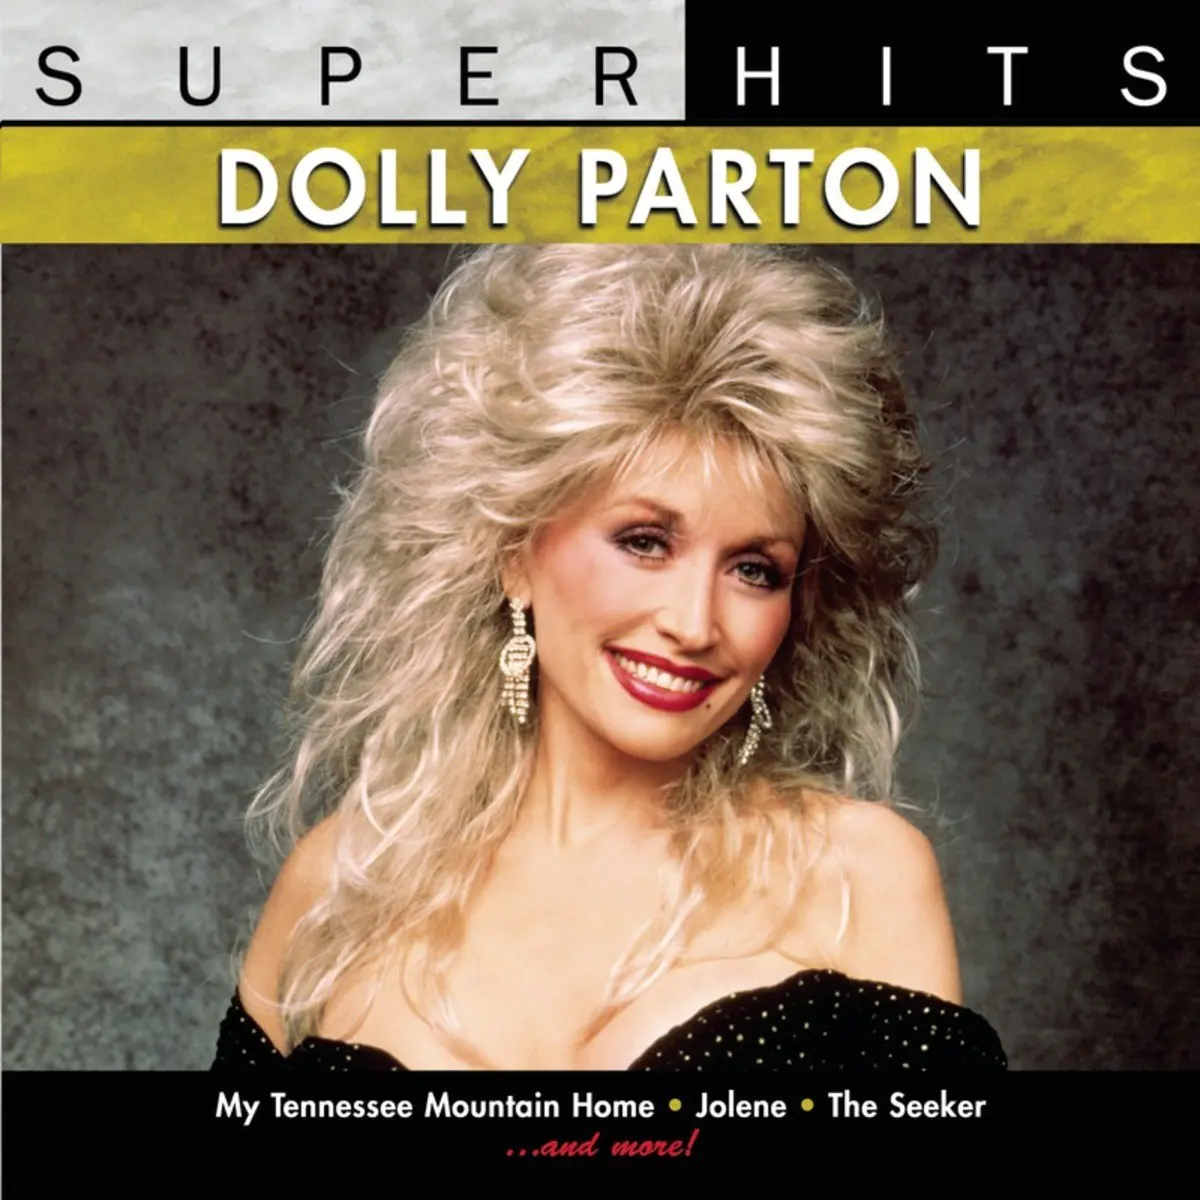 Download dolly parton music free